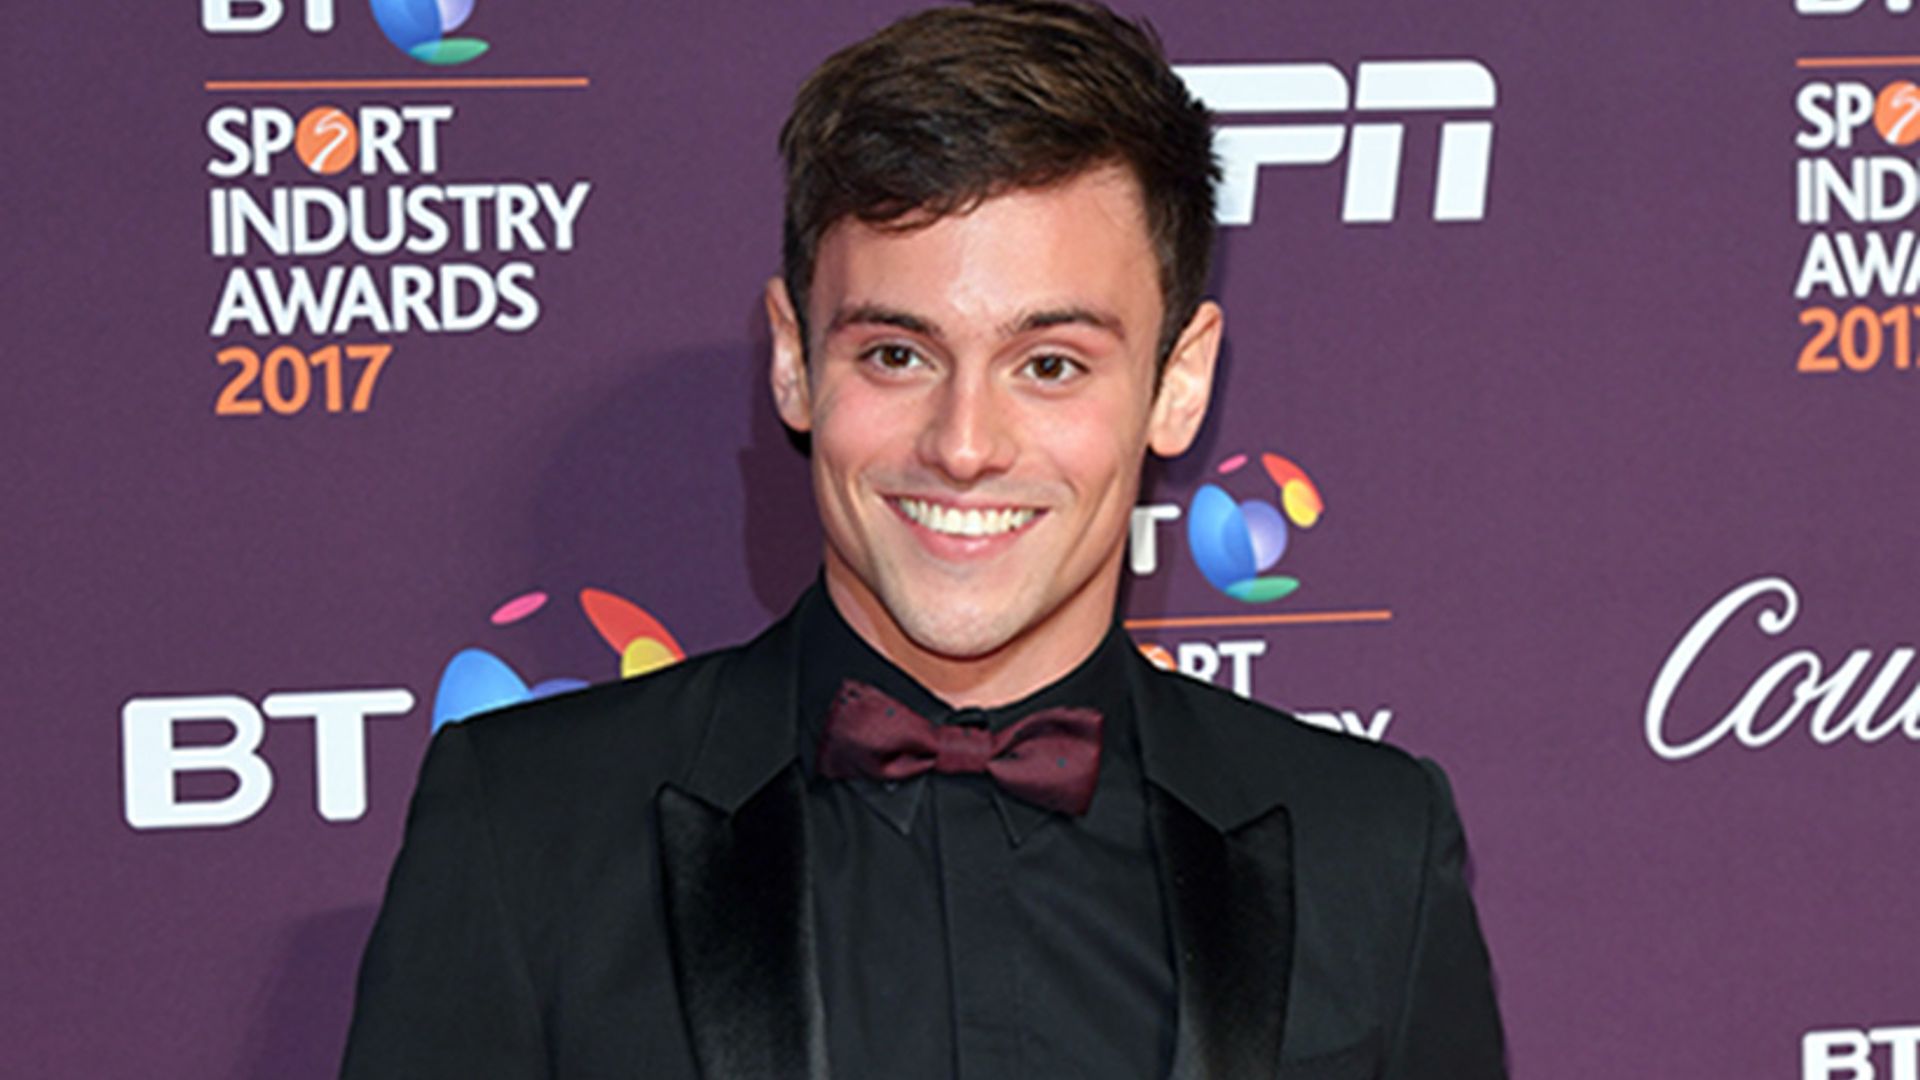 Tom Daley and Dustin Lance Black make first appearance as married couple - see the snap!